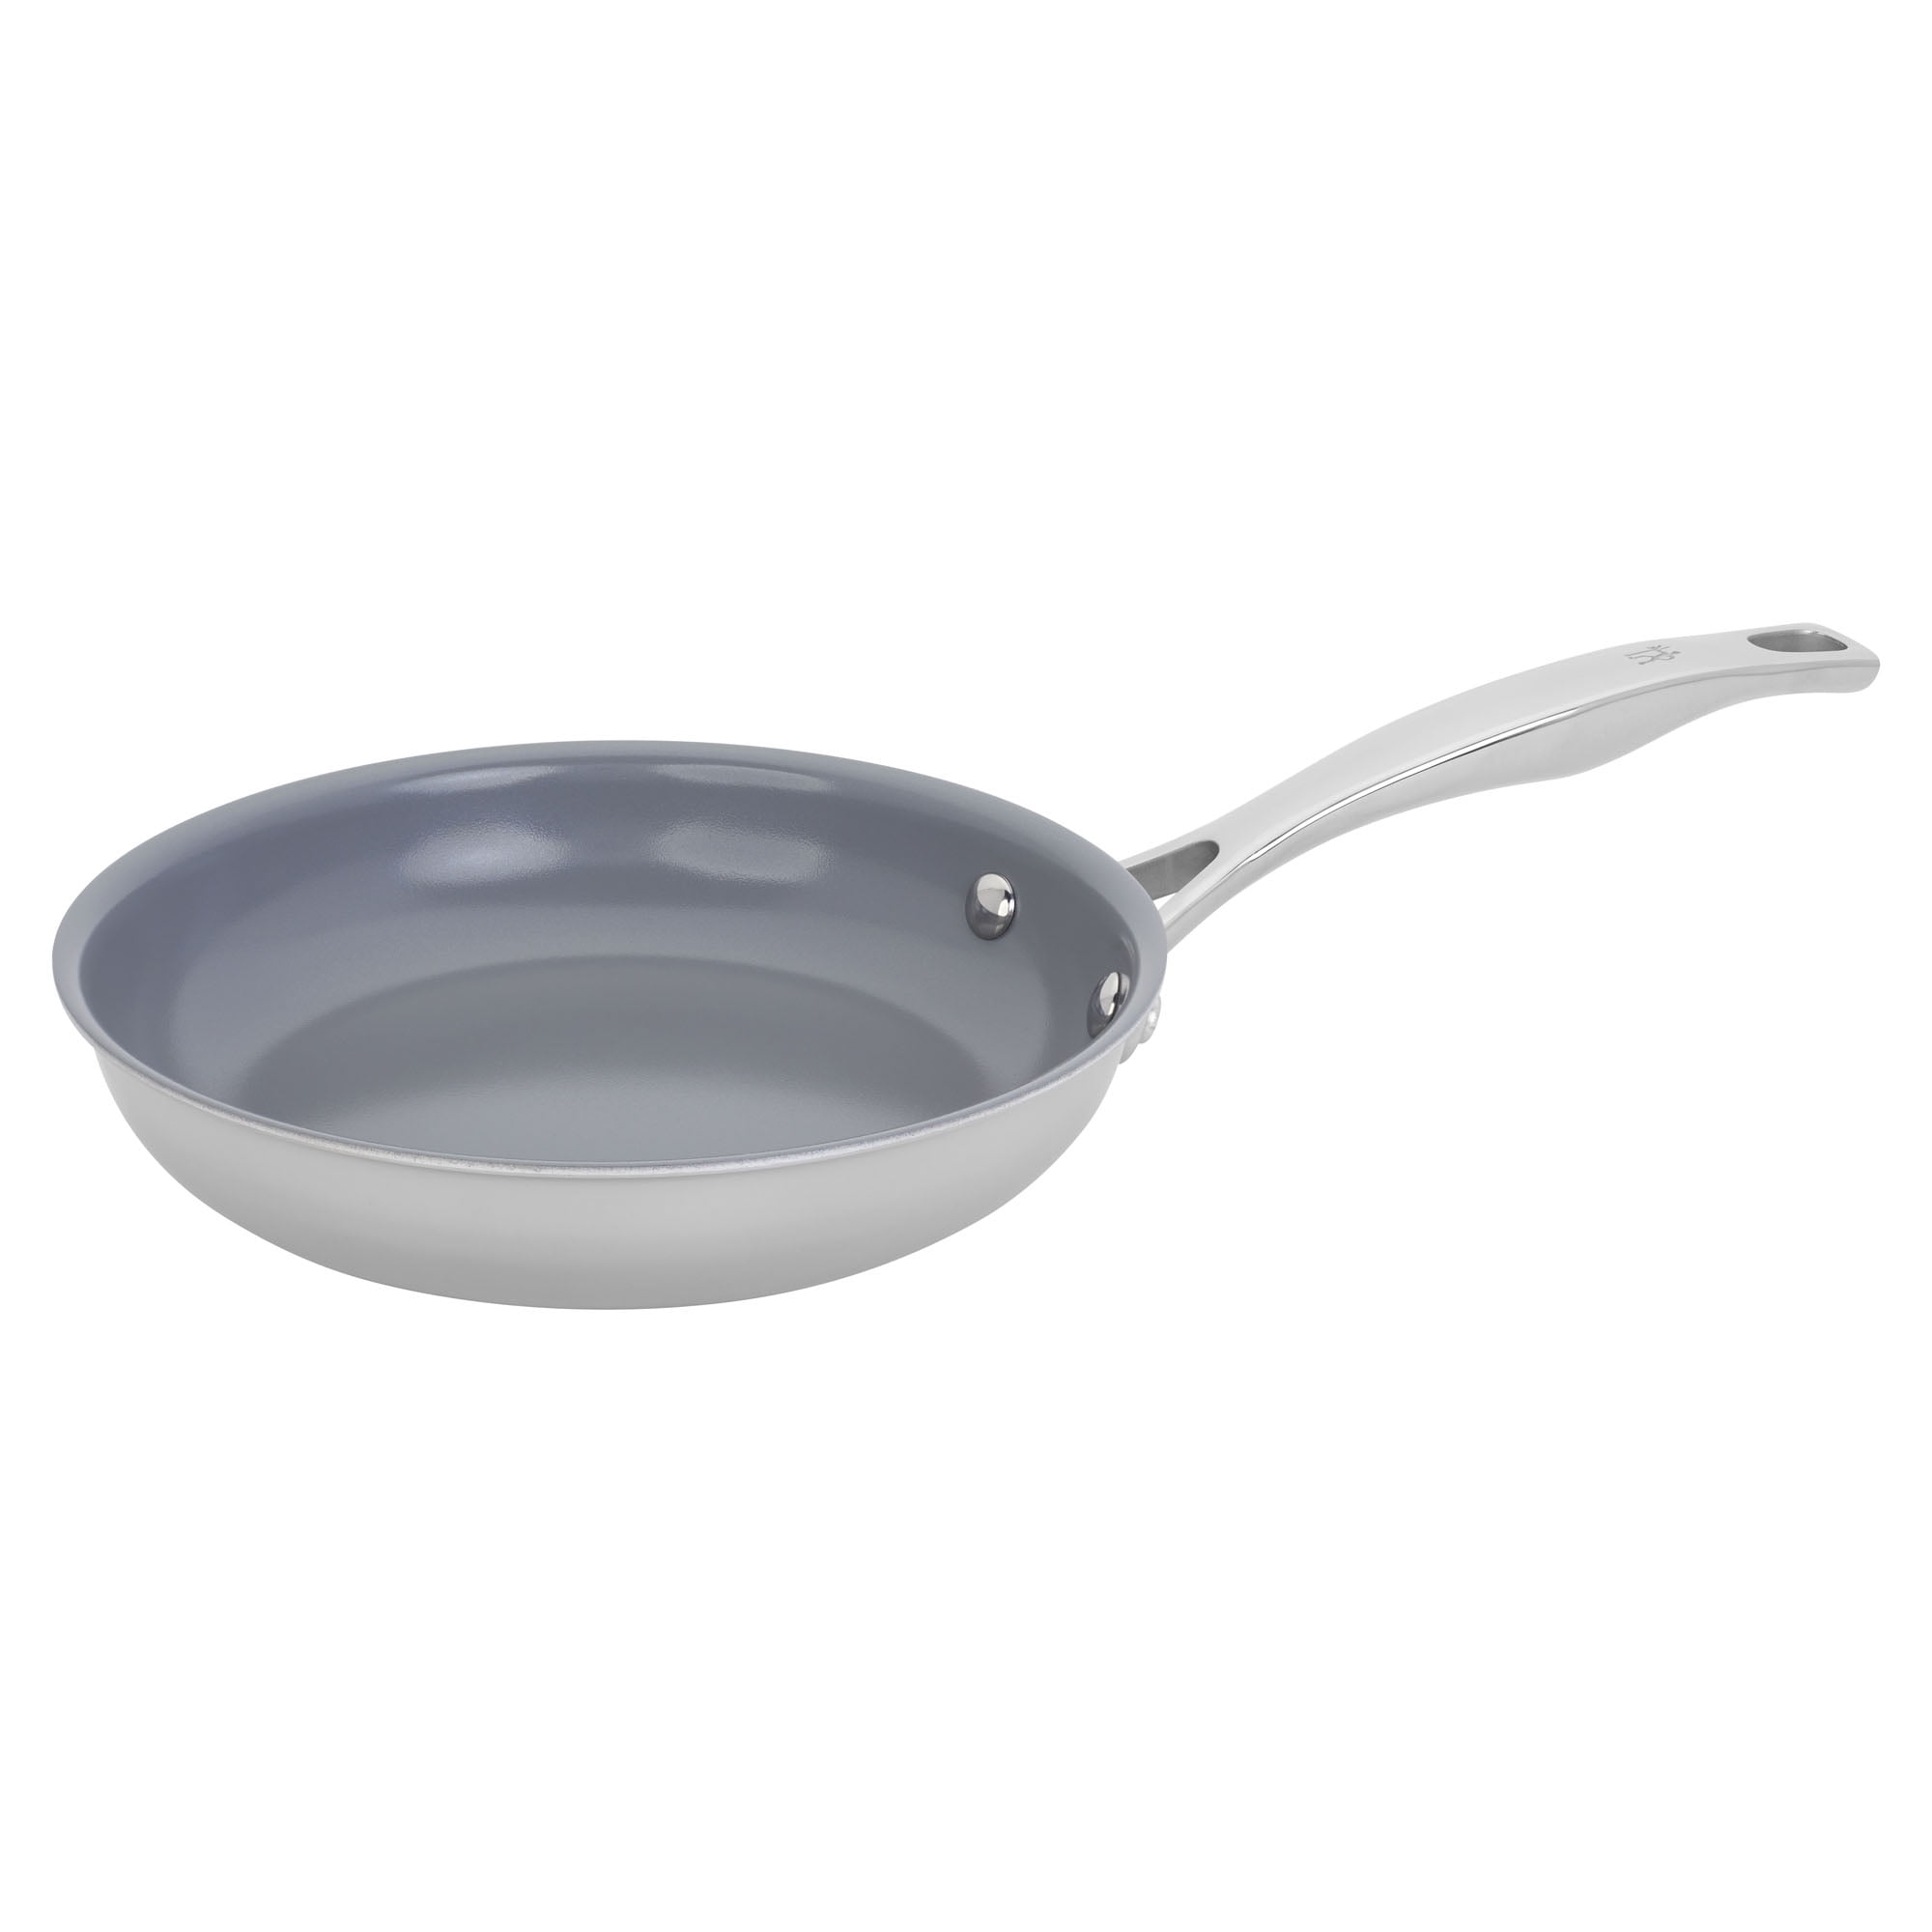 ZWILLING Spirit 3-ply 9.5-inch Stainless Steel Ceramic Nonstick Fry Pan  with Lid